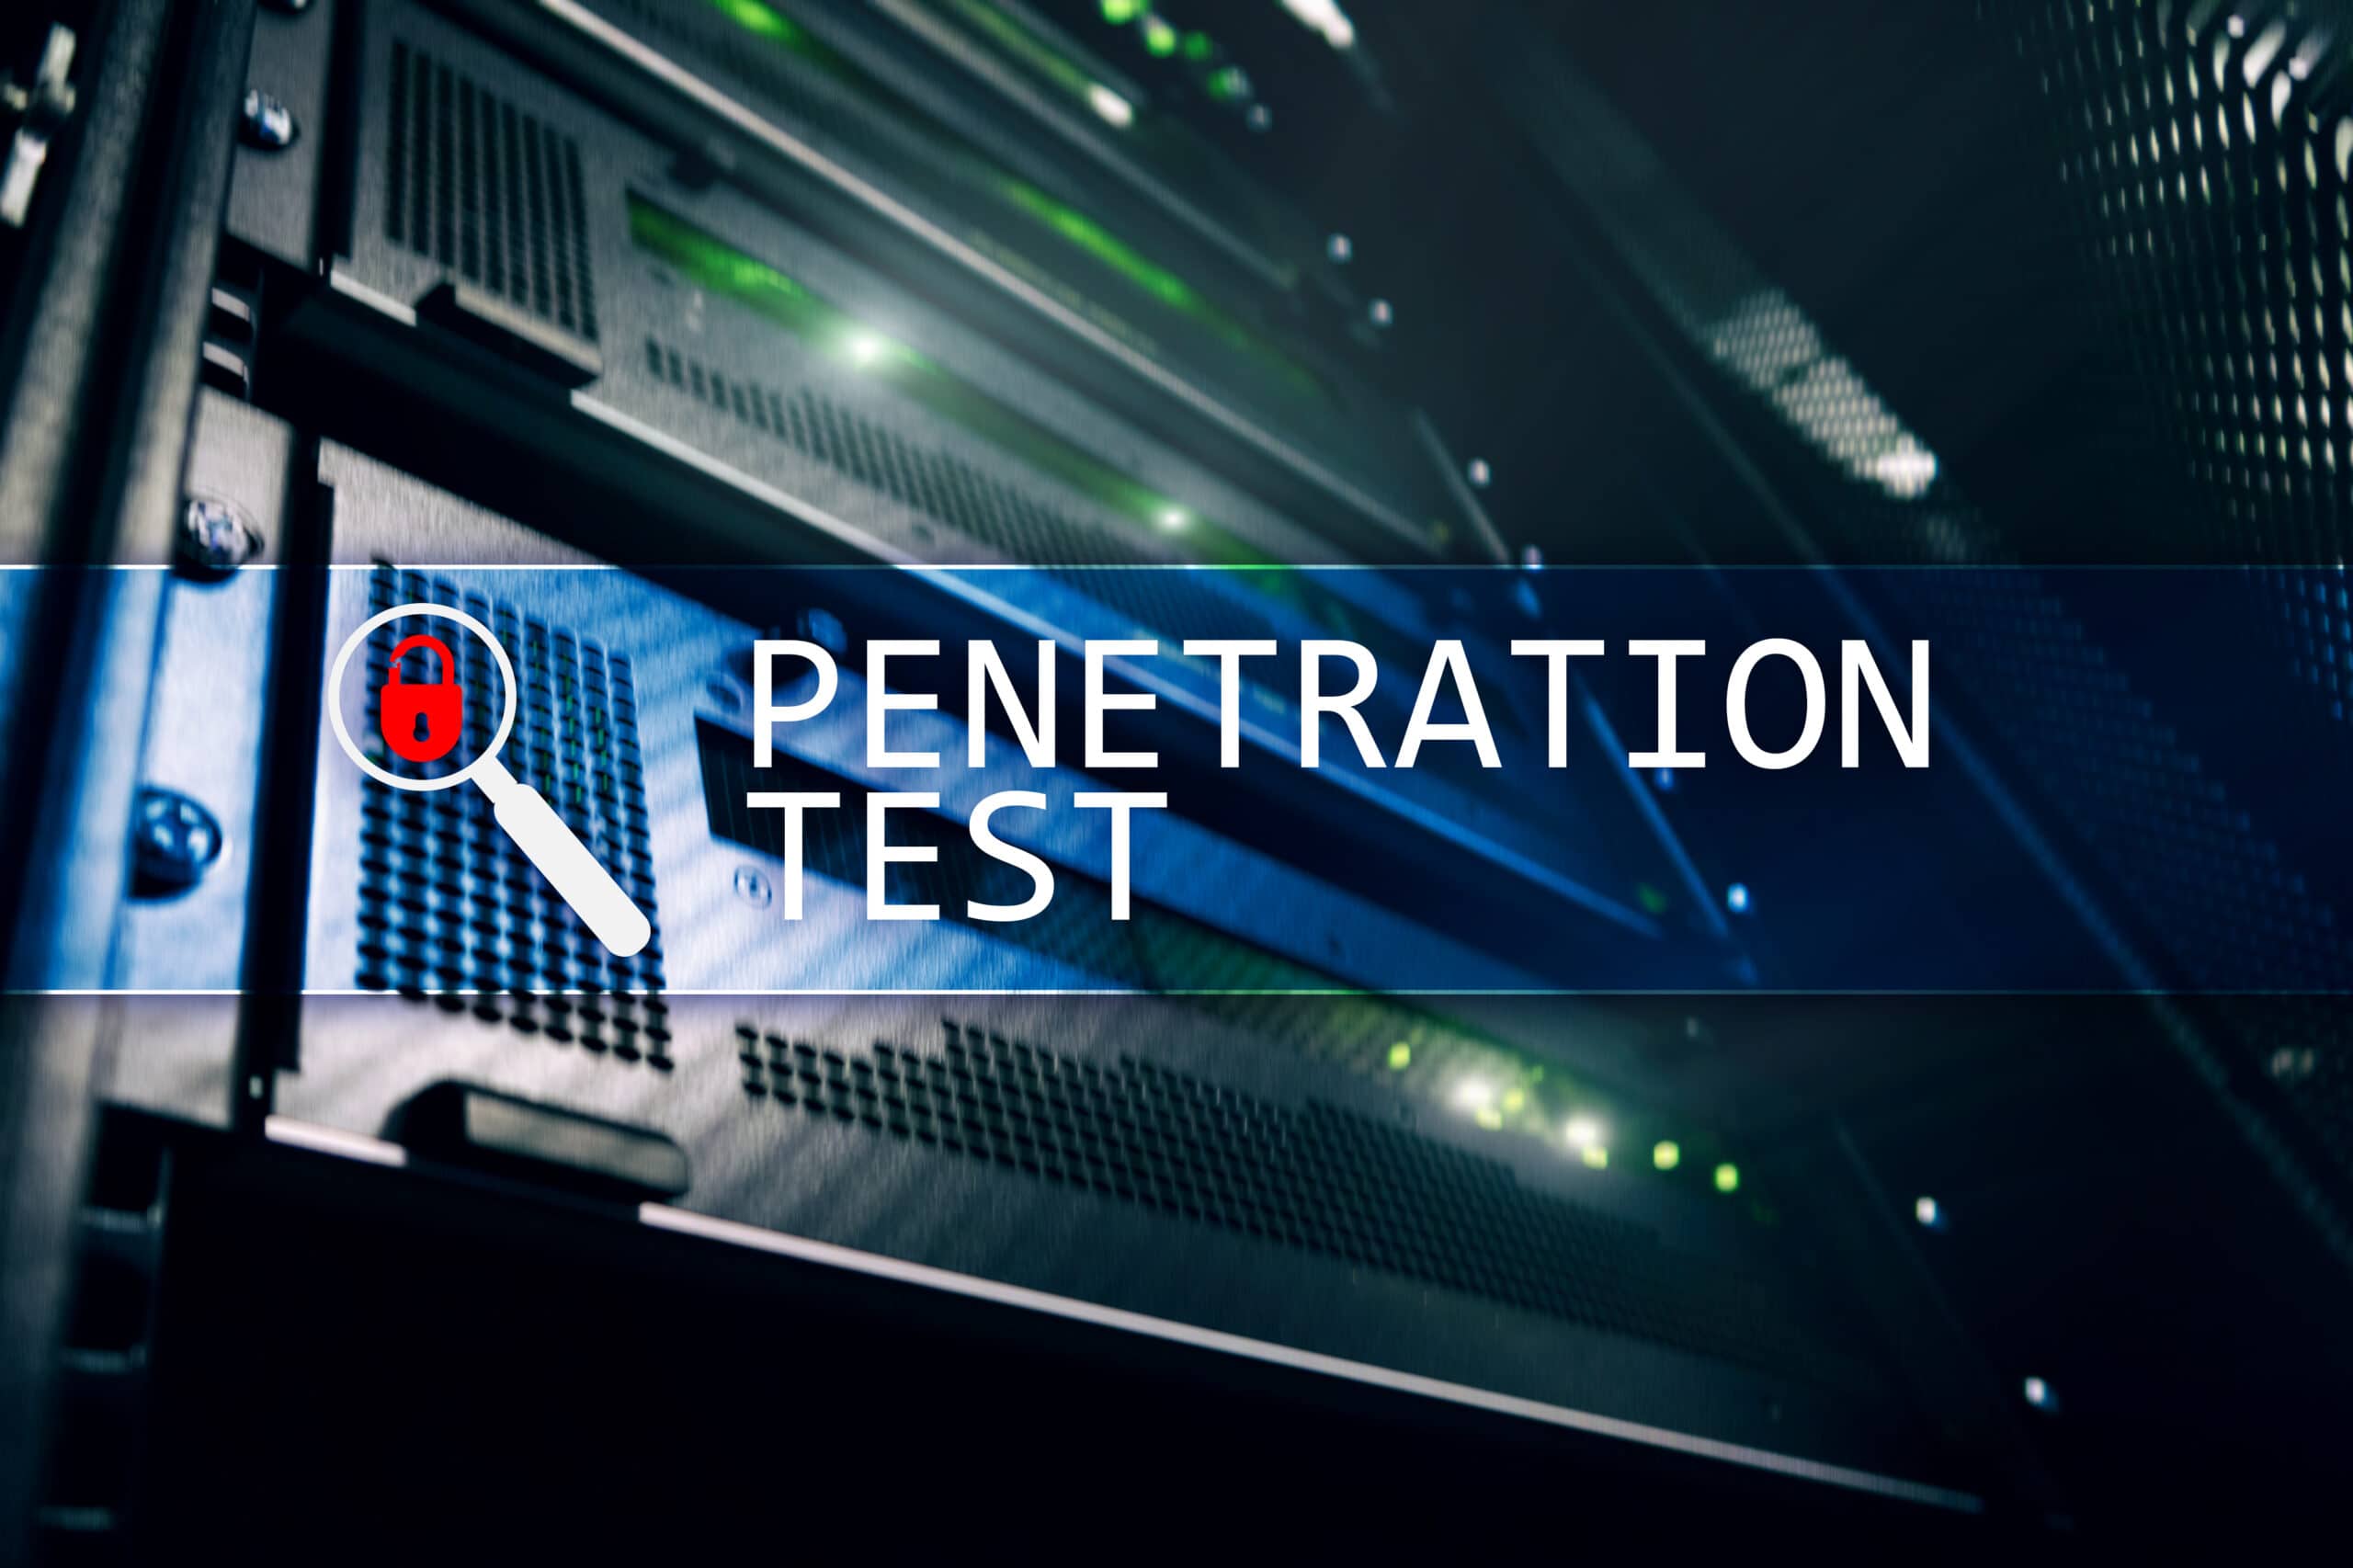 Spooky hi-tech background with words "penetration test."